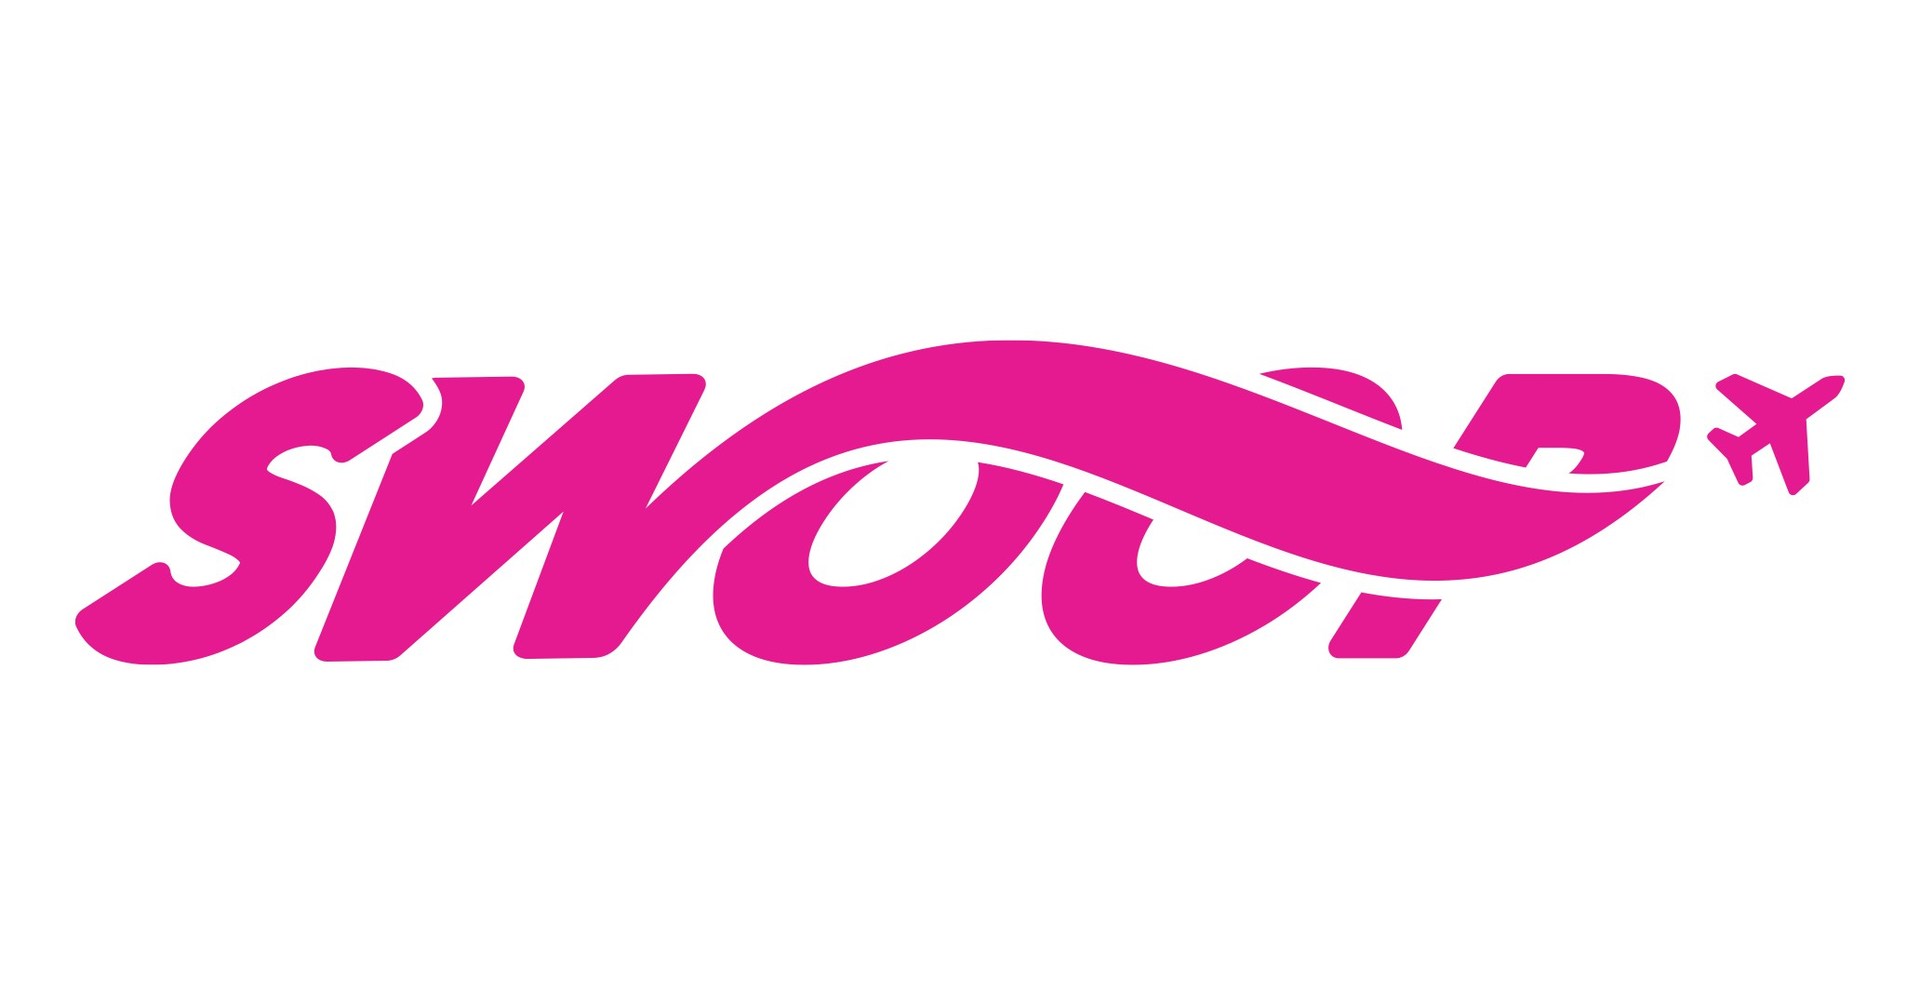 Swoop Announces Significant . Expansion with Five New Destinations